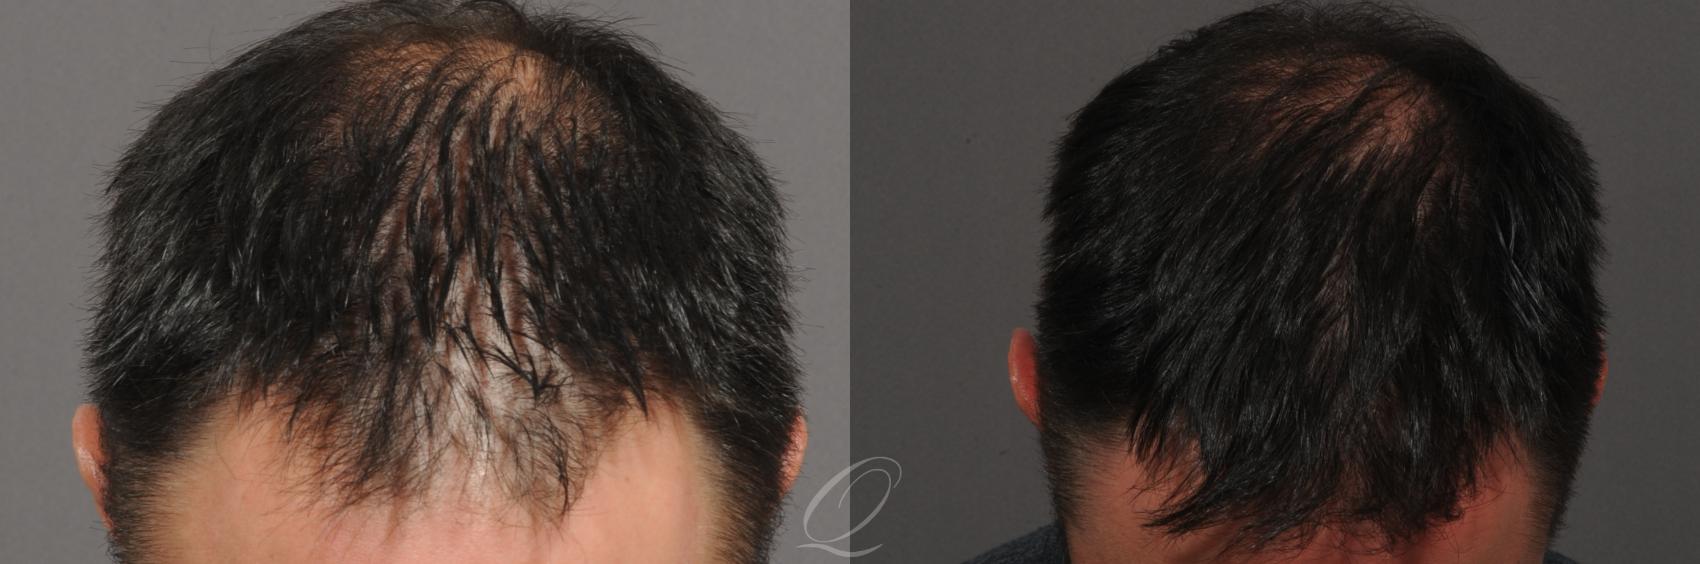 FUT Case 1017 Before & After View #2 | Rochester, Buffalo, & Syracuse, NY | Quatela Center for Hair Restoration